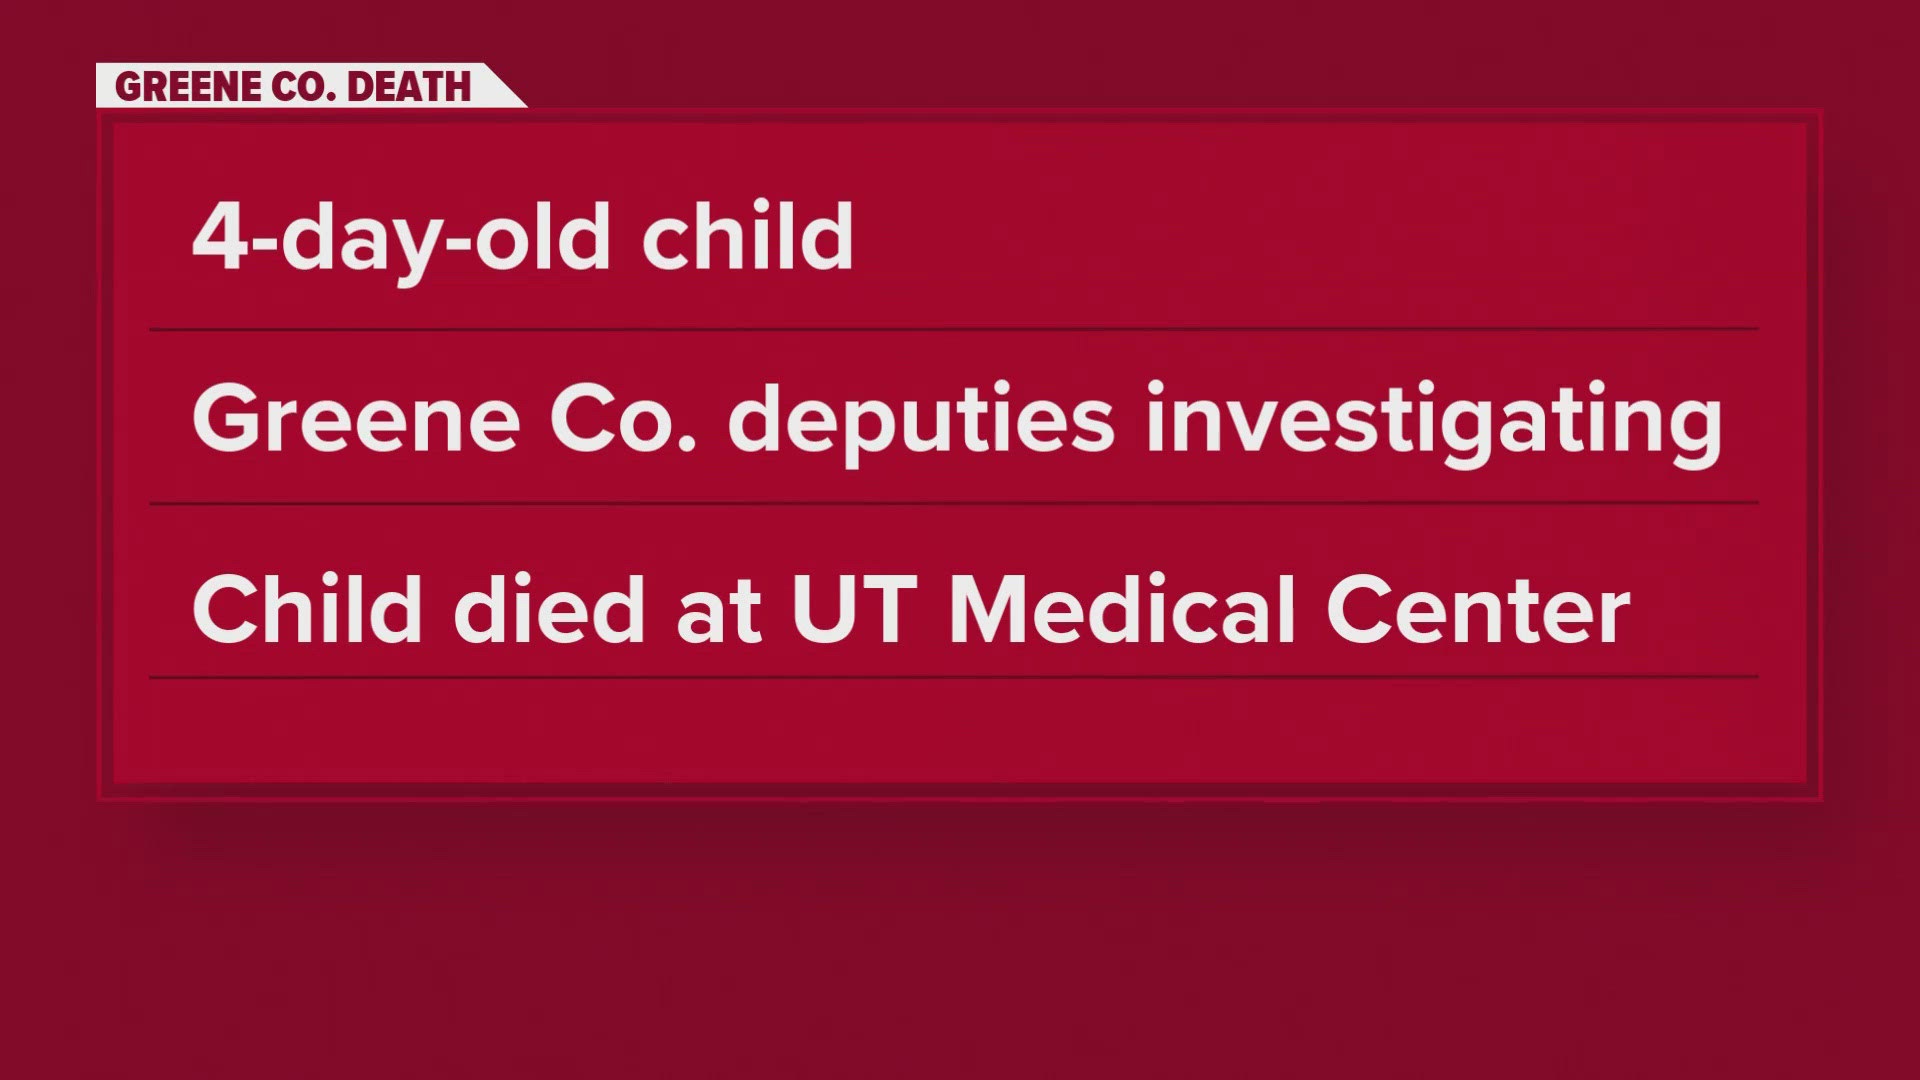 The Knox County Forensic Center confirmed the 4-day-old baby died at the University of Tennessee Medical Center Tuesday. This story is developing.